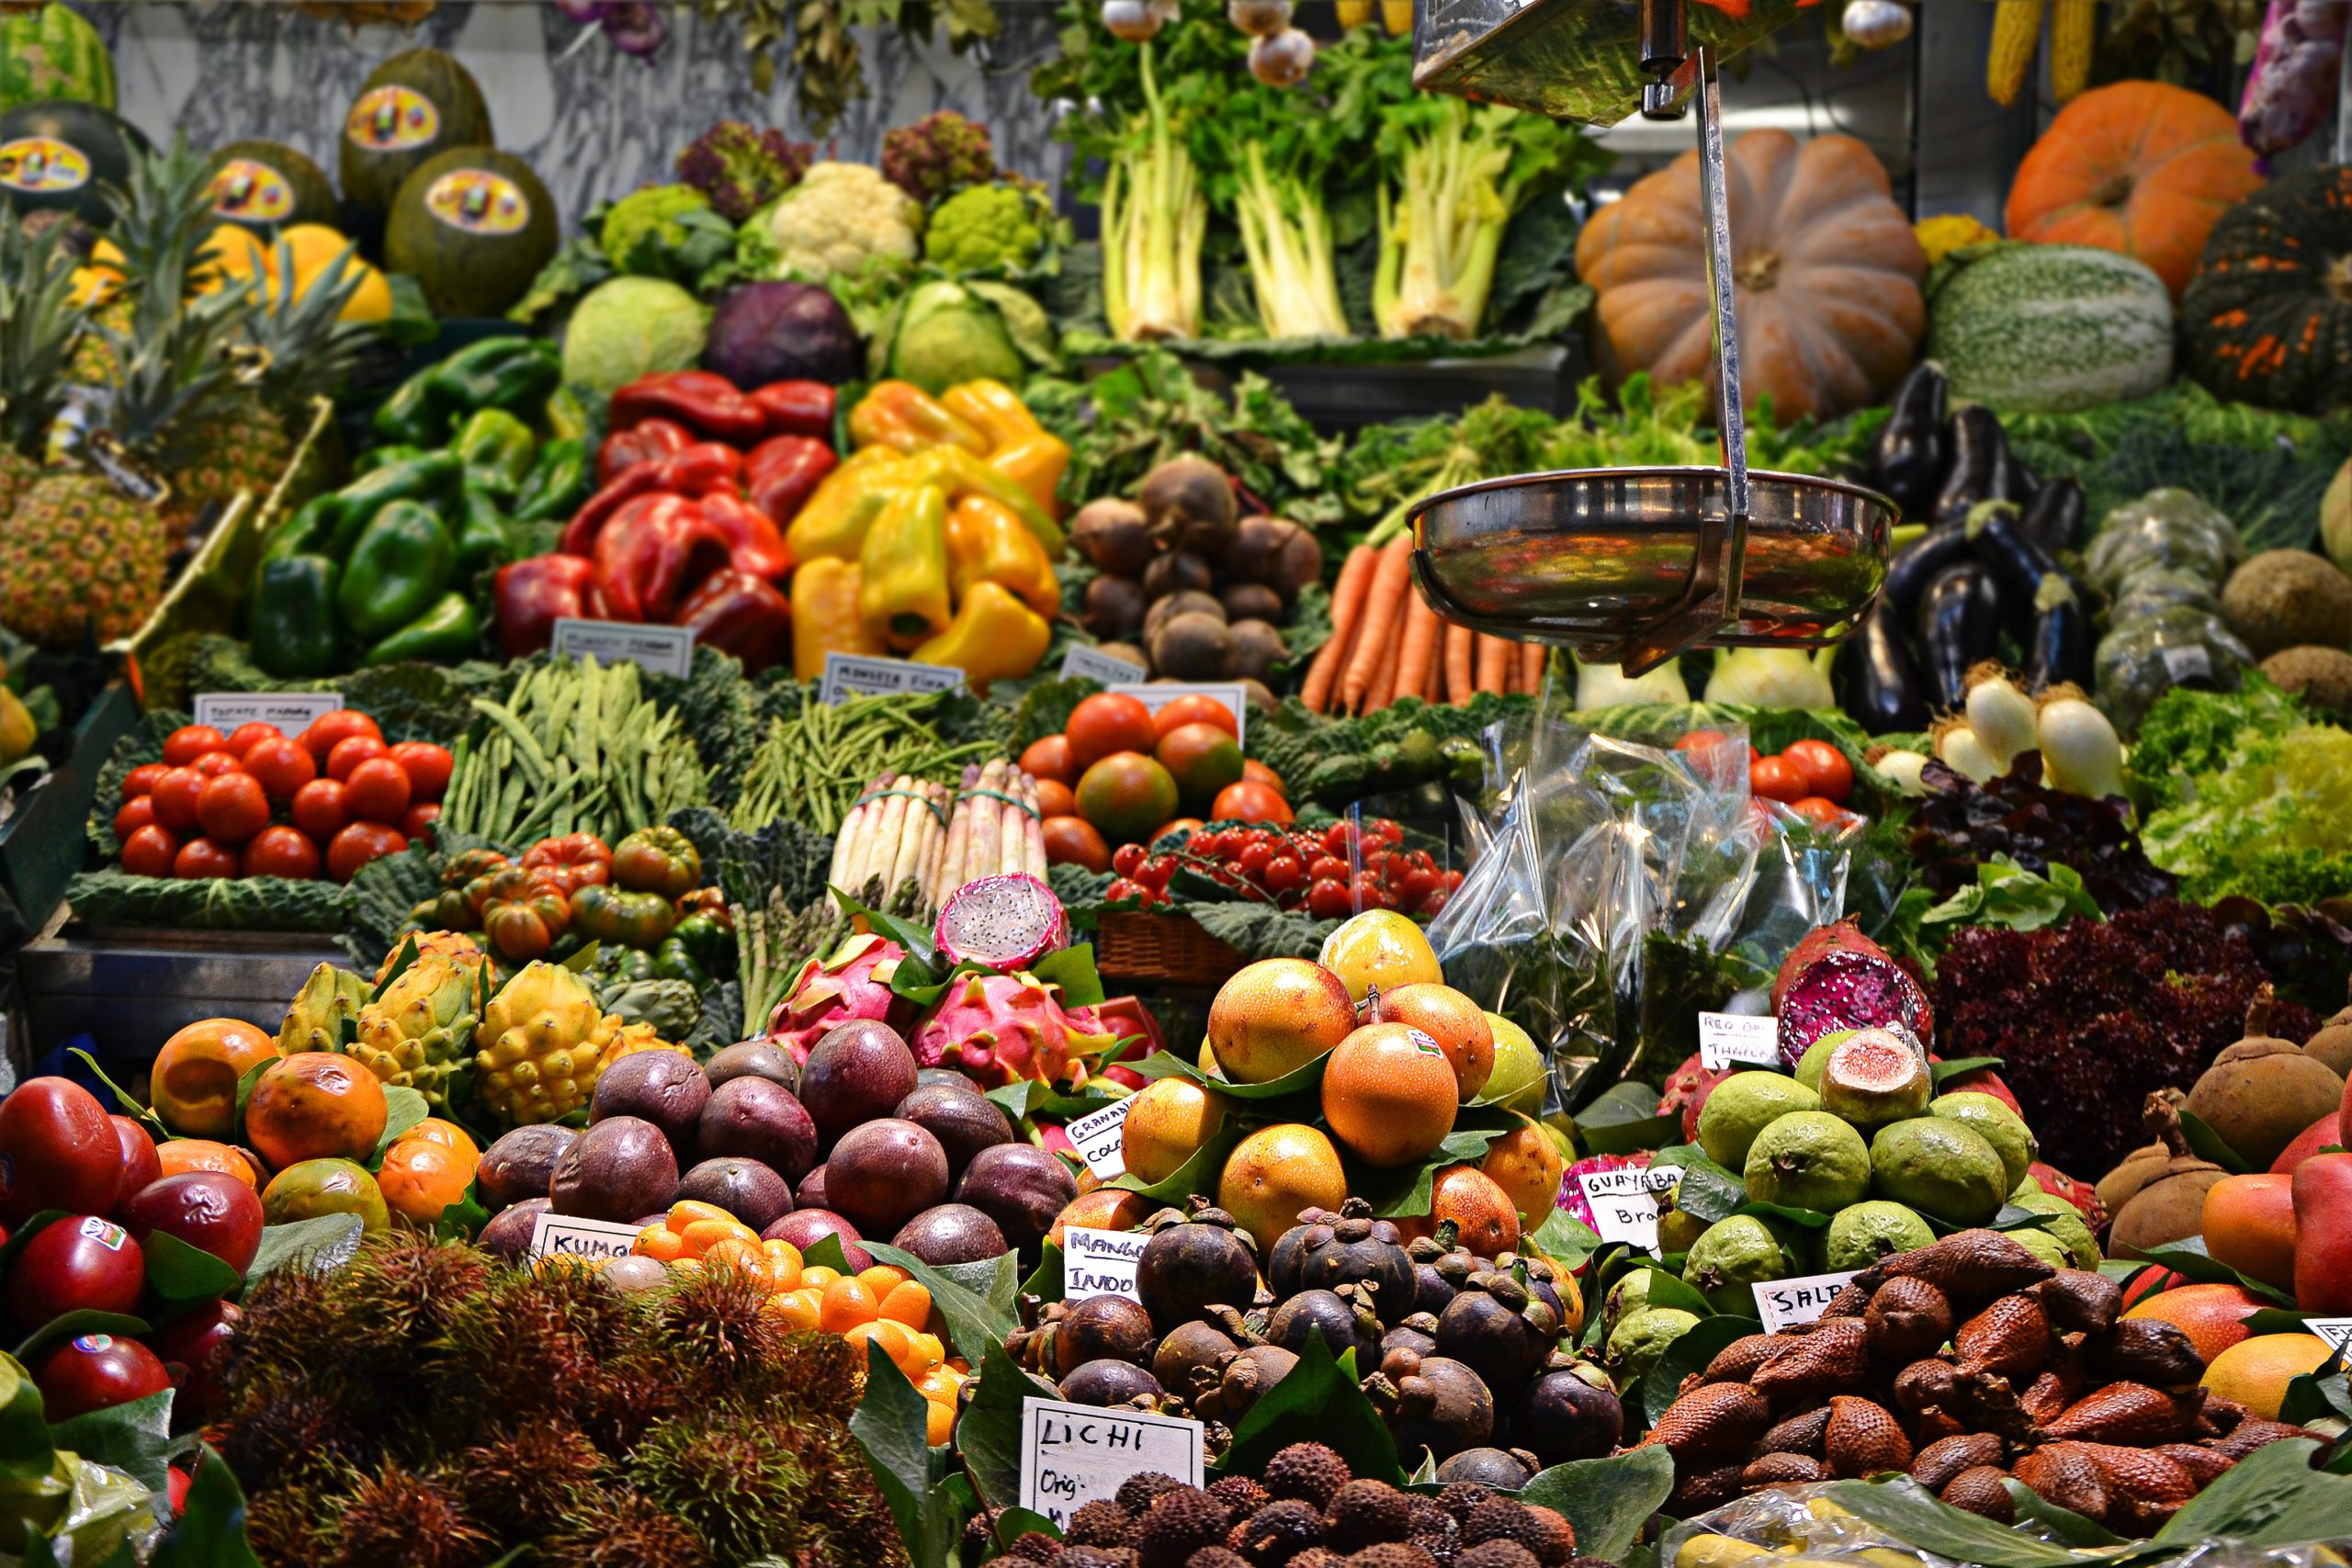 How many fruits and vegetables do we really need?